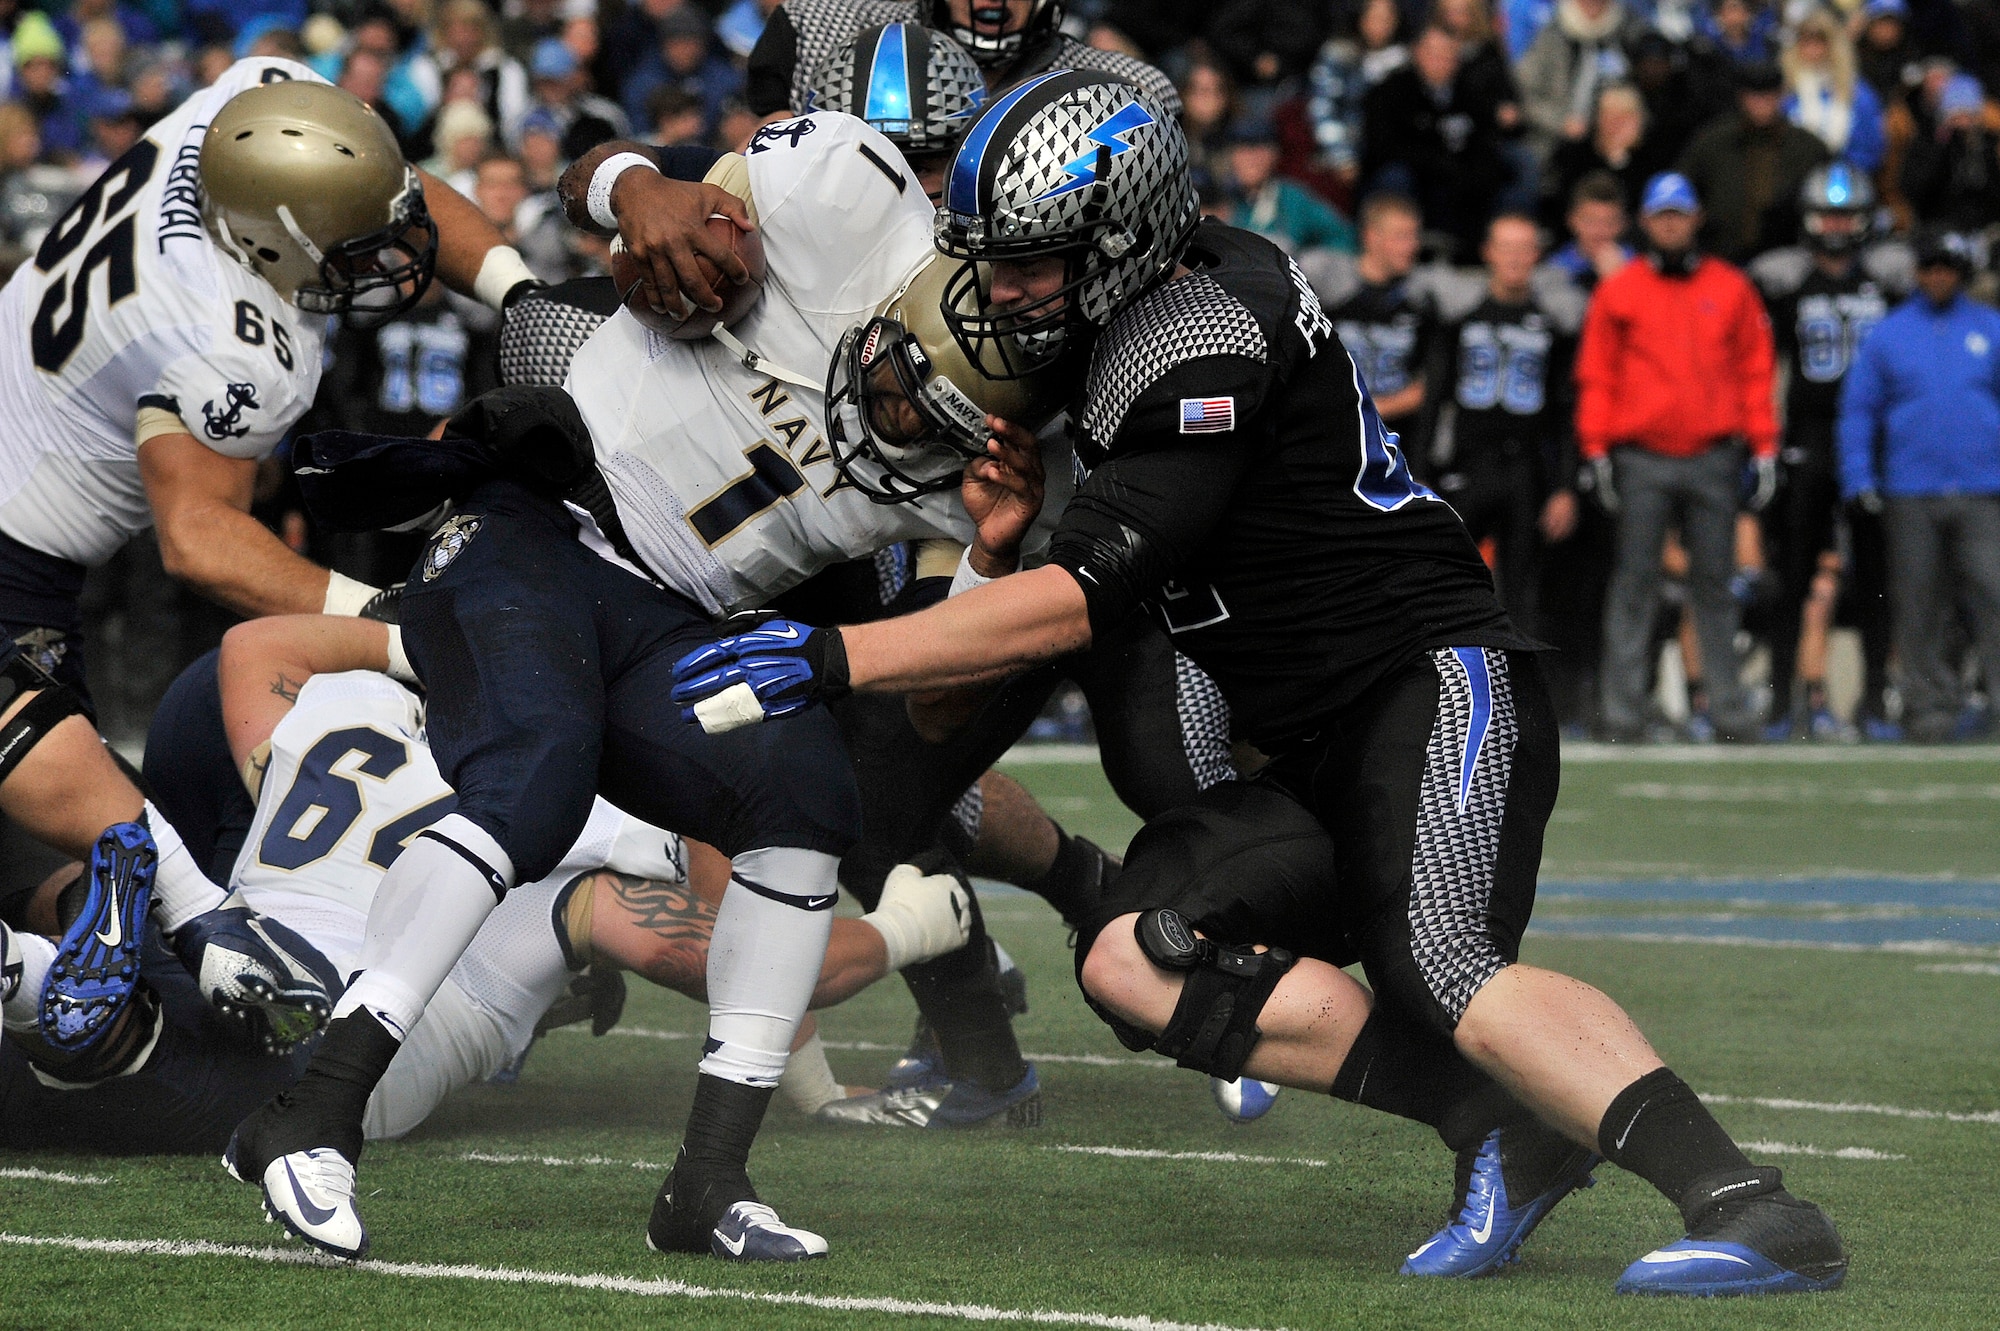 Air Force senior linebacker Austin Niklas stops Navy quarterback Trey Miller during the Navy-Air Force game at Falcon Stadium Oct. 6, 2012. The Midshipmen defeated the Falcons in overtime, 28-21. (U.S. Air Force photo/Mark Watkins)